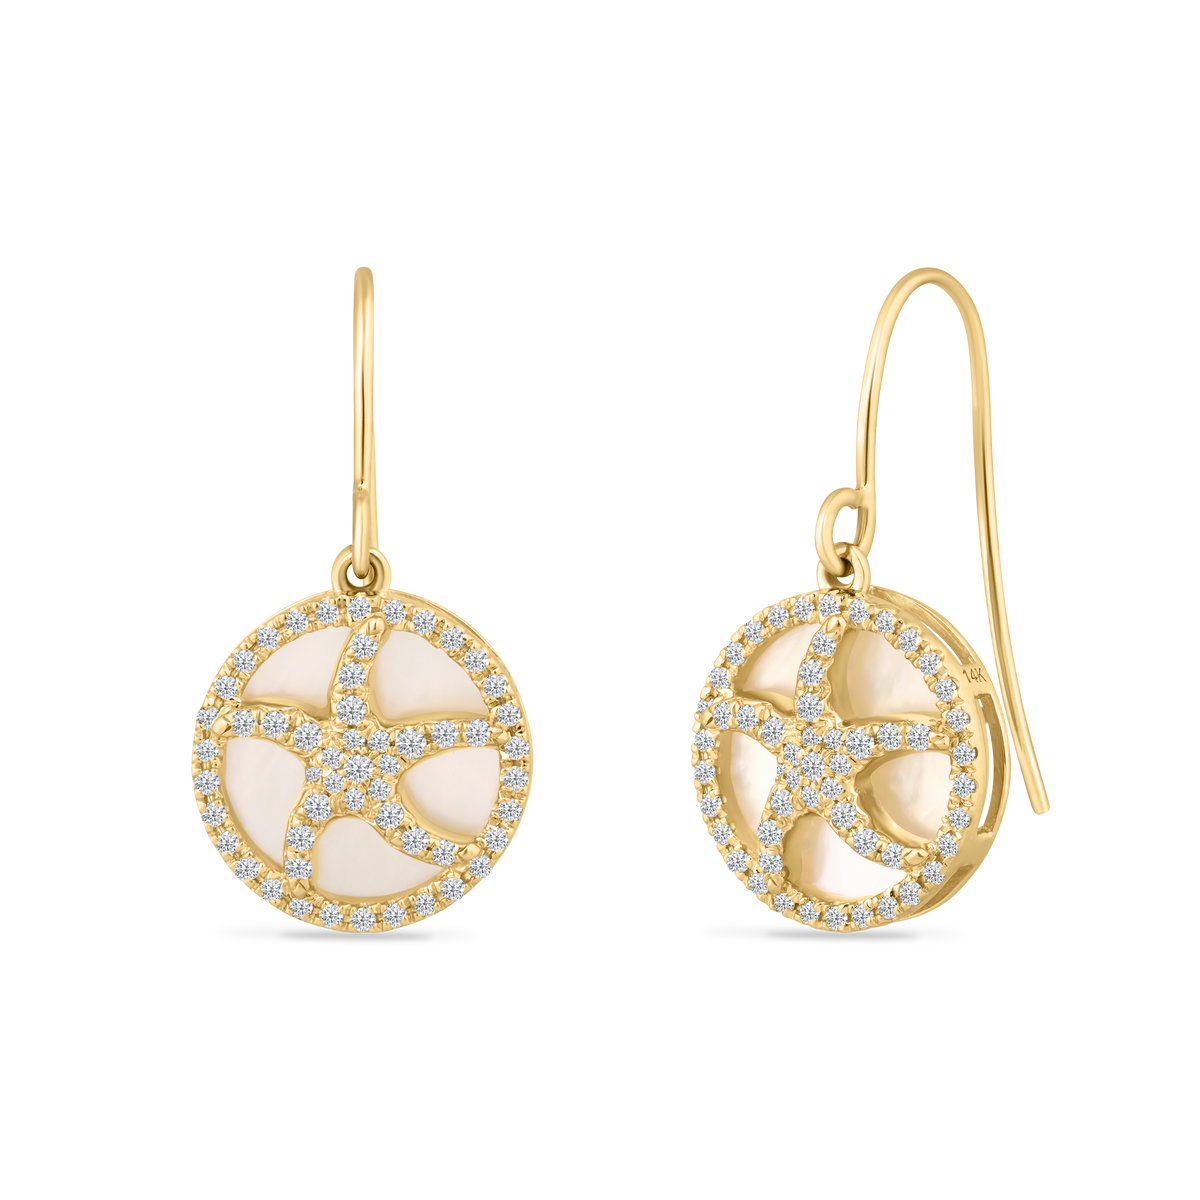 14K MOTHER OF PEARL STARFISH EARRINGS ON WIRE WITH 110 DIAMONDS 0.38CT